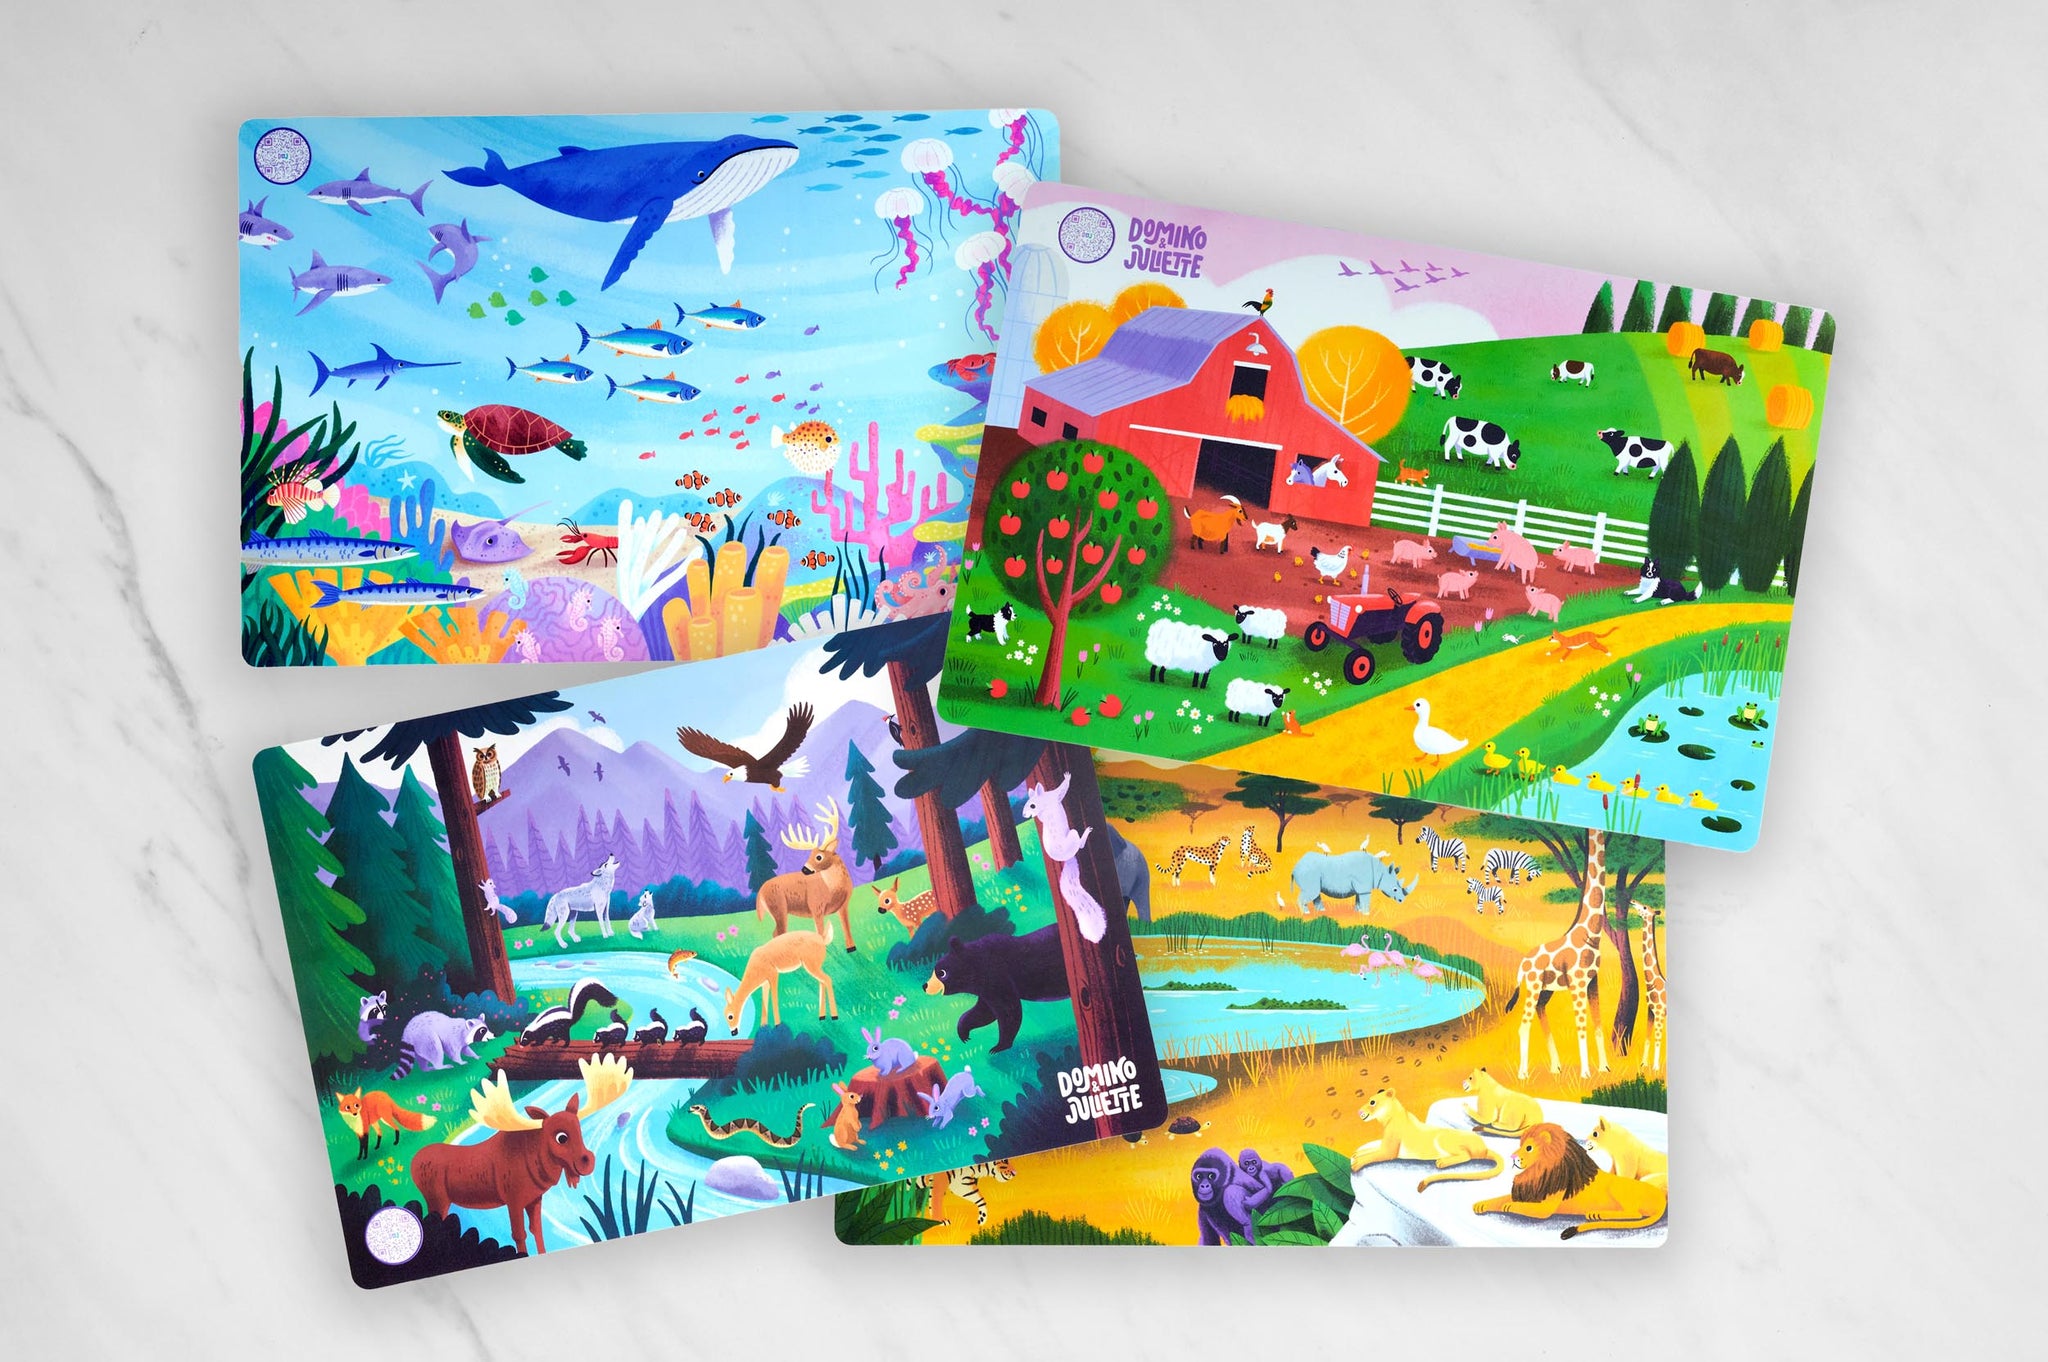 Toddler Placemat, Farm placemat, Sea placemat, Safari placemat, Woods placemat, learning tools preschoolers, educational toys for preschoolers, preschool toys, toys for early childhood development